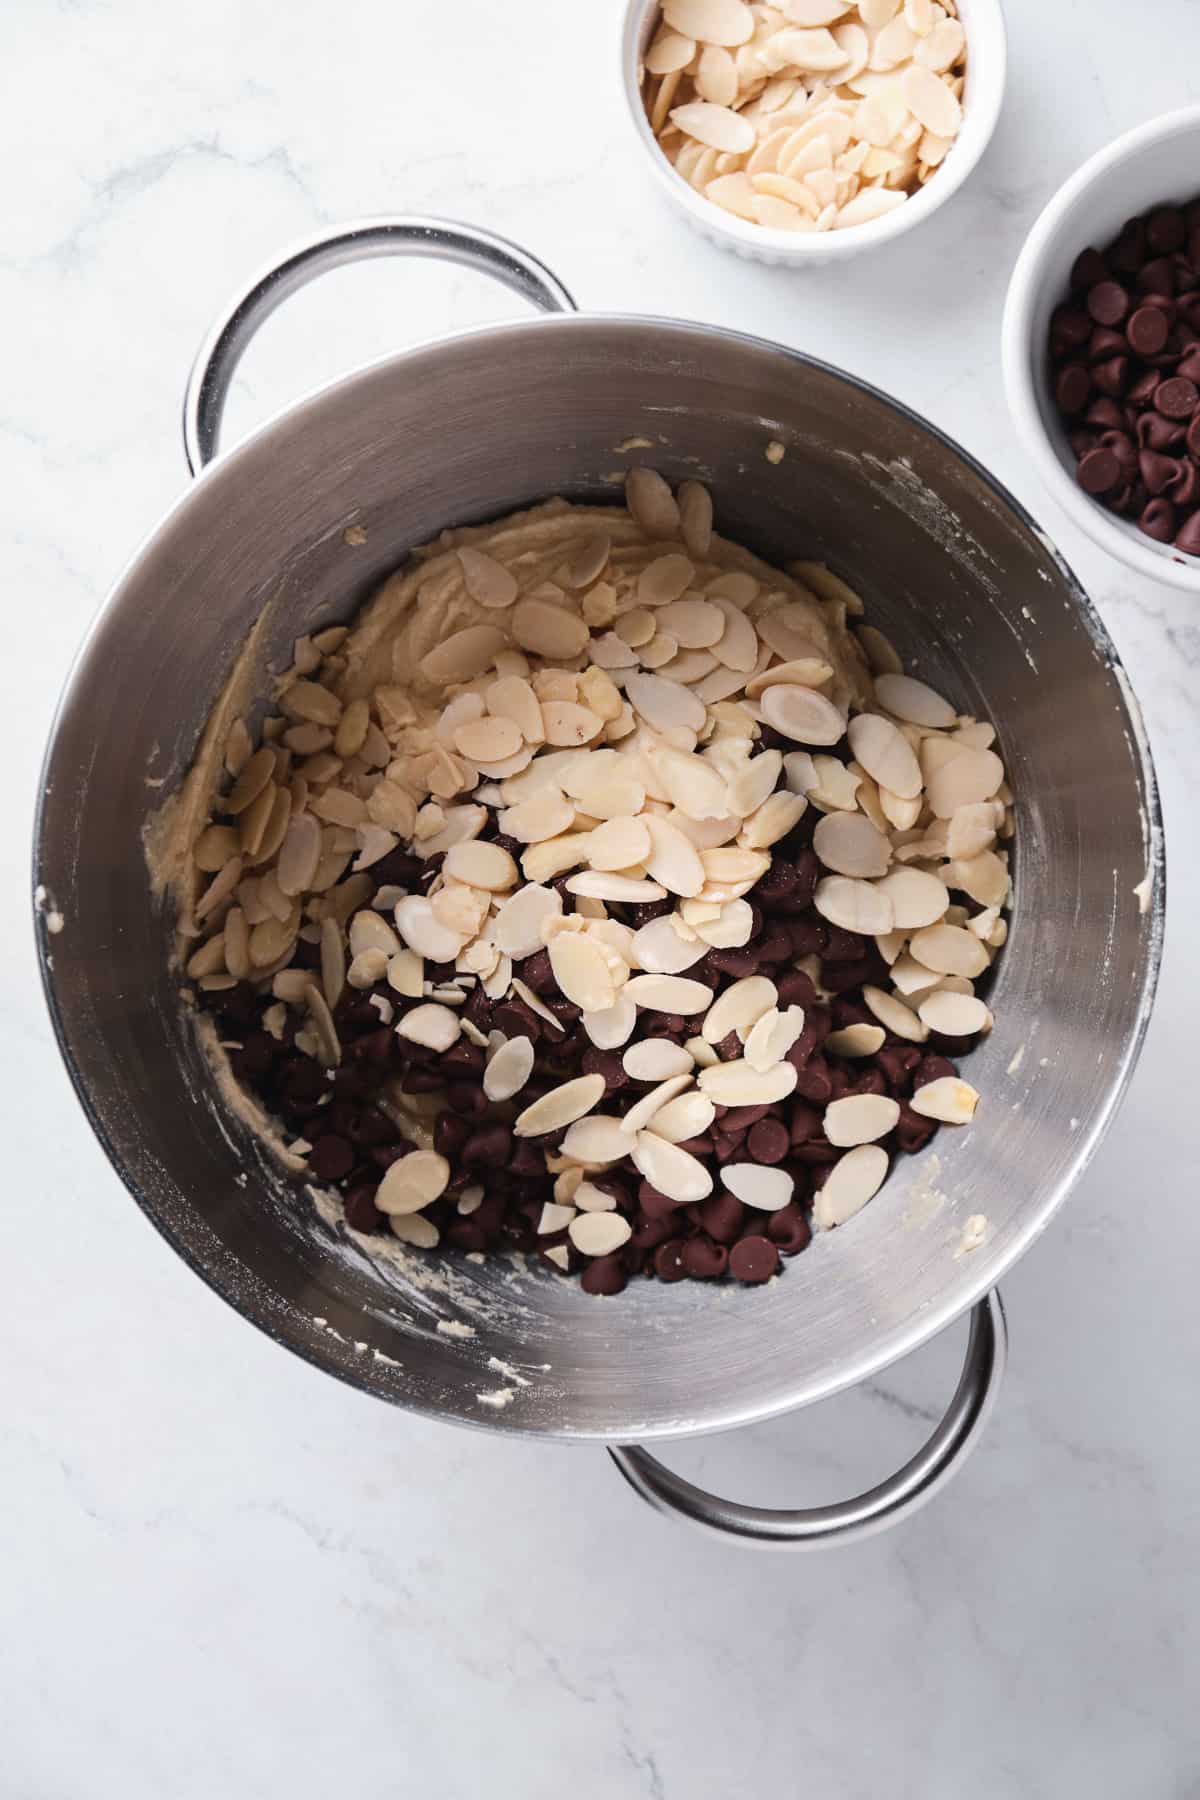 sliced almonds and chocolate chips added to cookie bar dough.